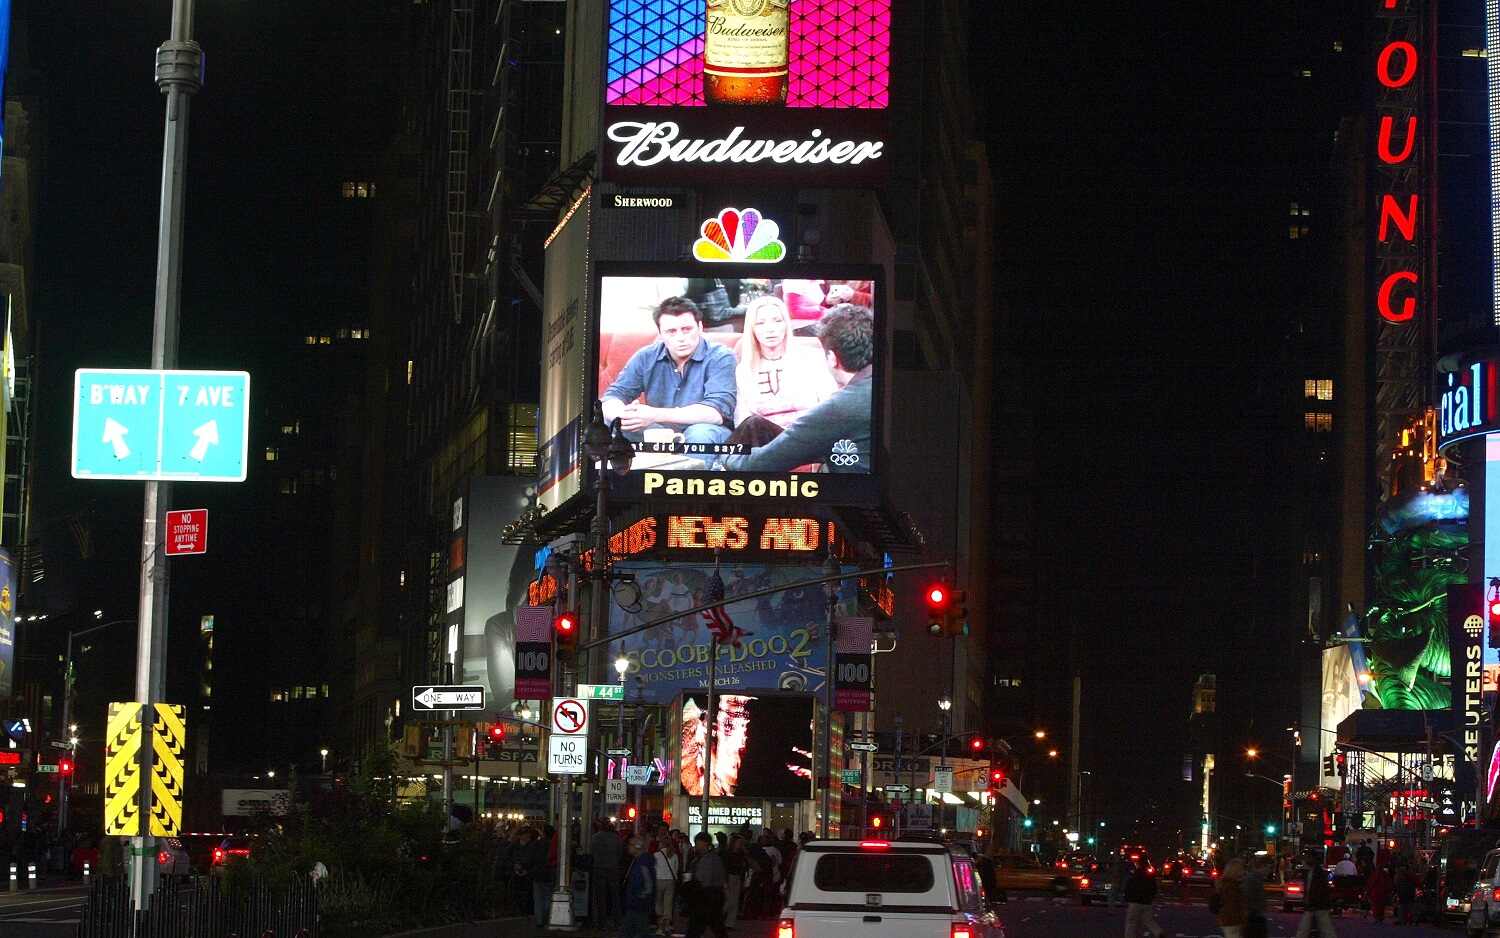 The 'Friends' finale is broadcast on a screen in Times Square in 2004. Groups gathered to see the finale